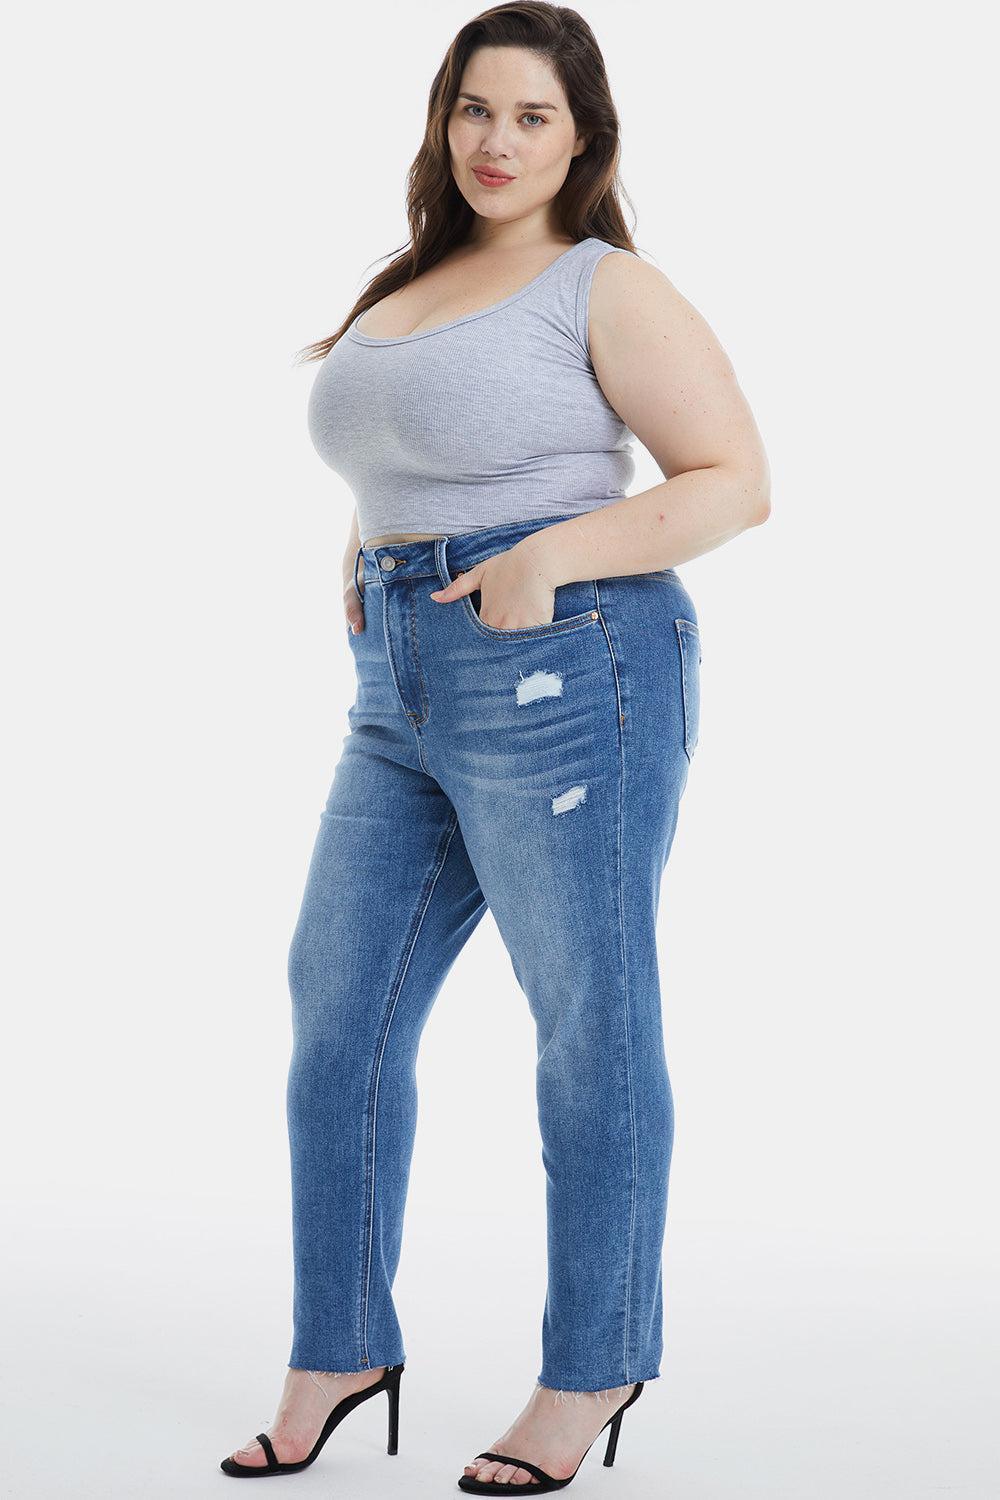 a woman in a grey shirt and jeans